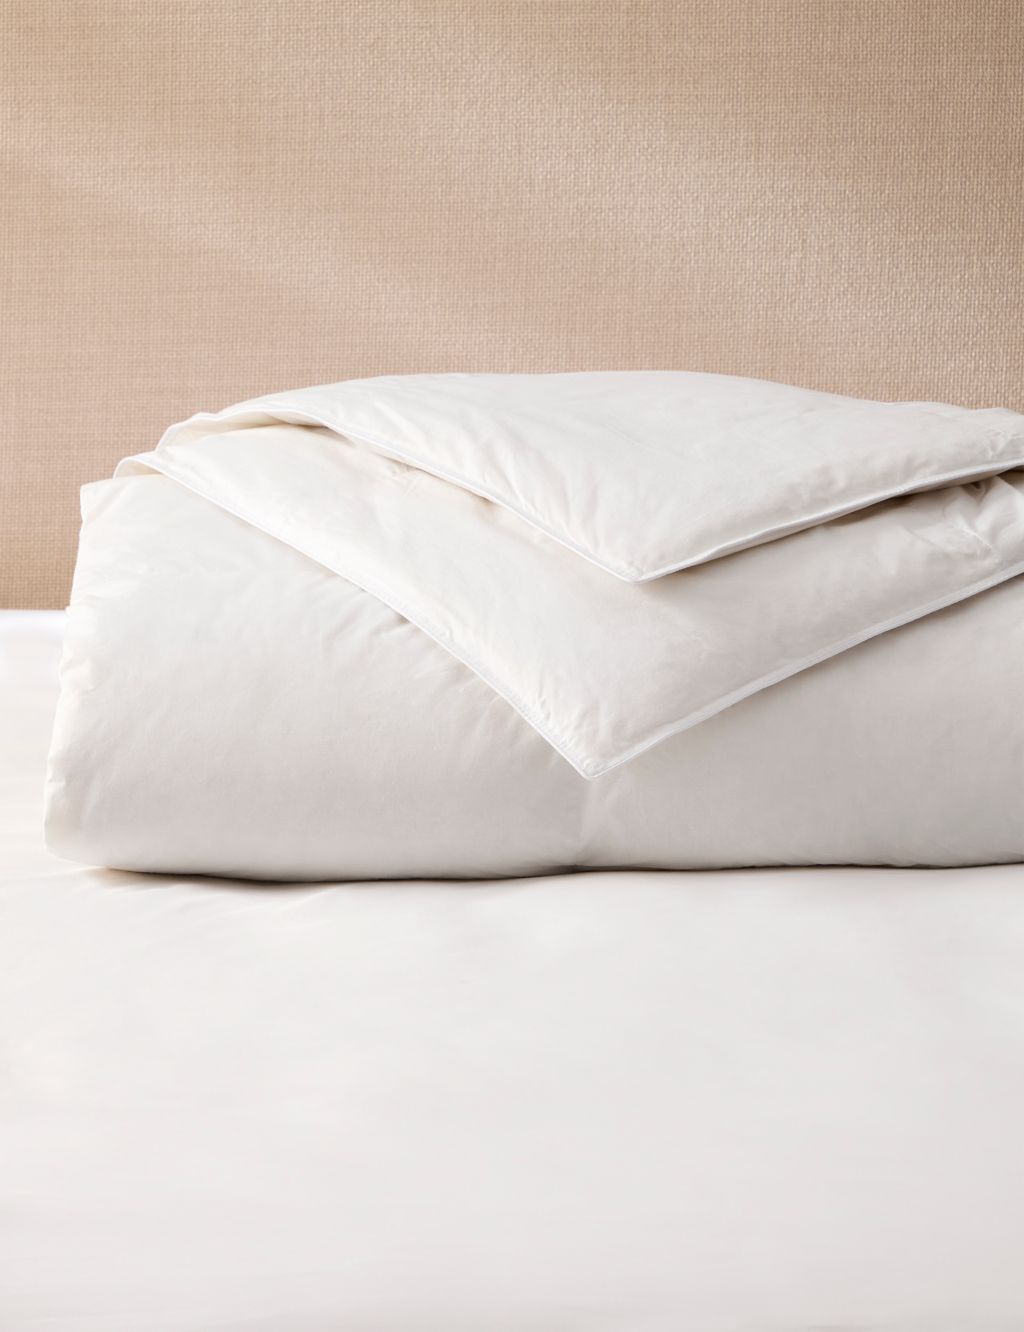 Duck Feather & Down 10.5 Tog Duvet image 1